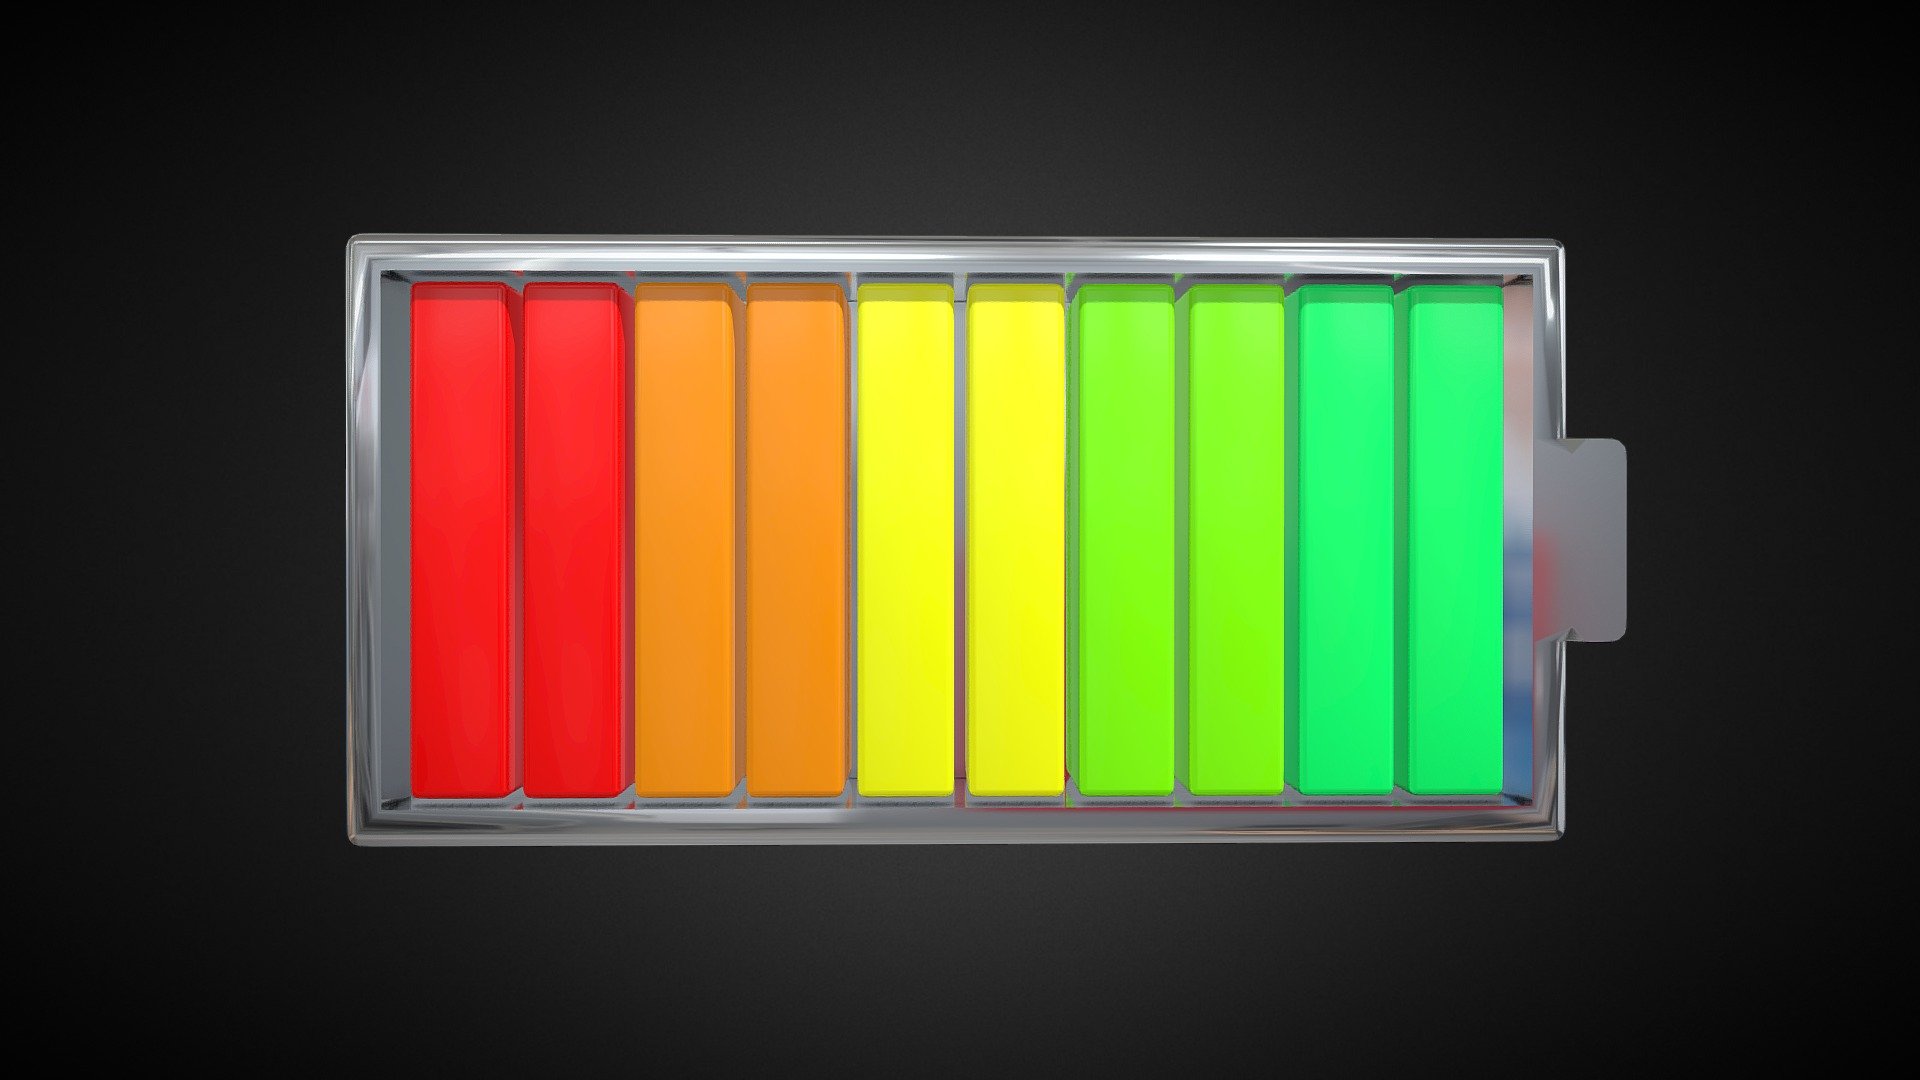 Just a low poly battery with 10 bars and with different colors for every 2 bars from lowest to highest percentage 3d model